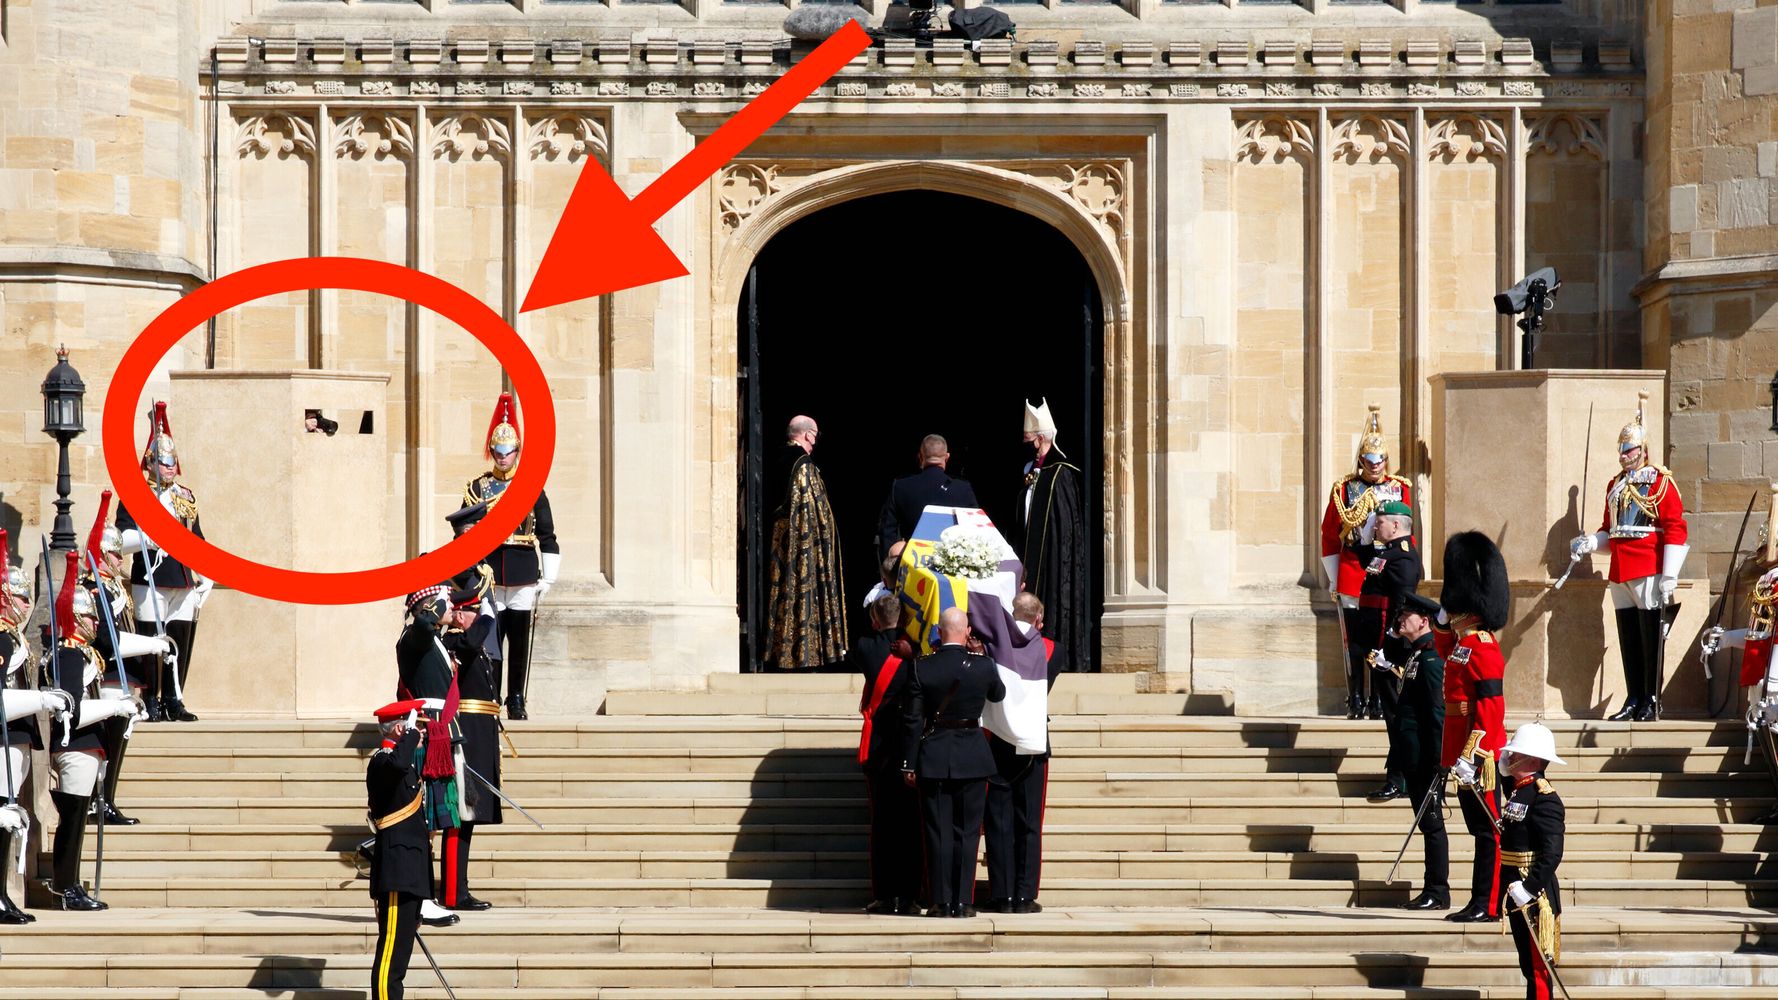 Photographer reveals how he treated Prince Philip’s funeral in the most unobtrusive way